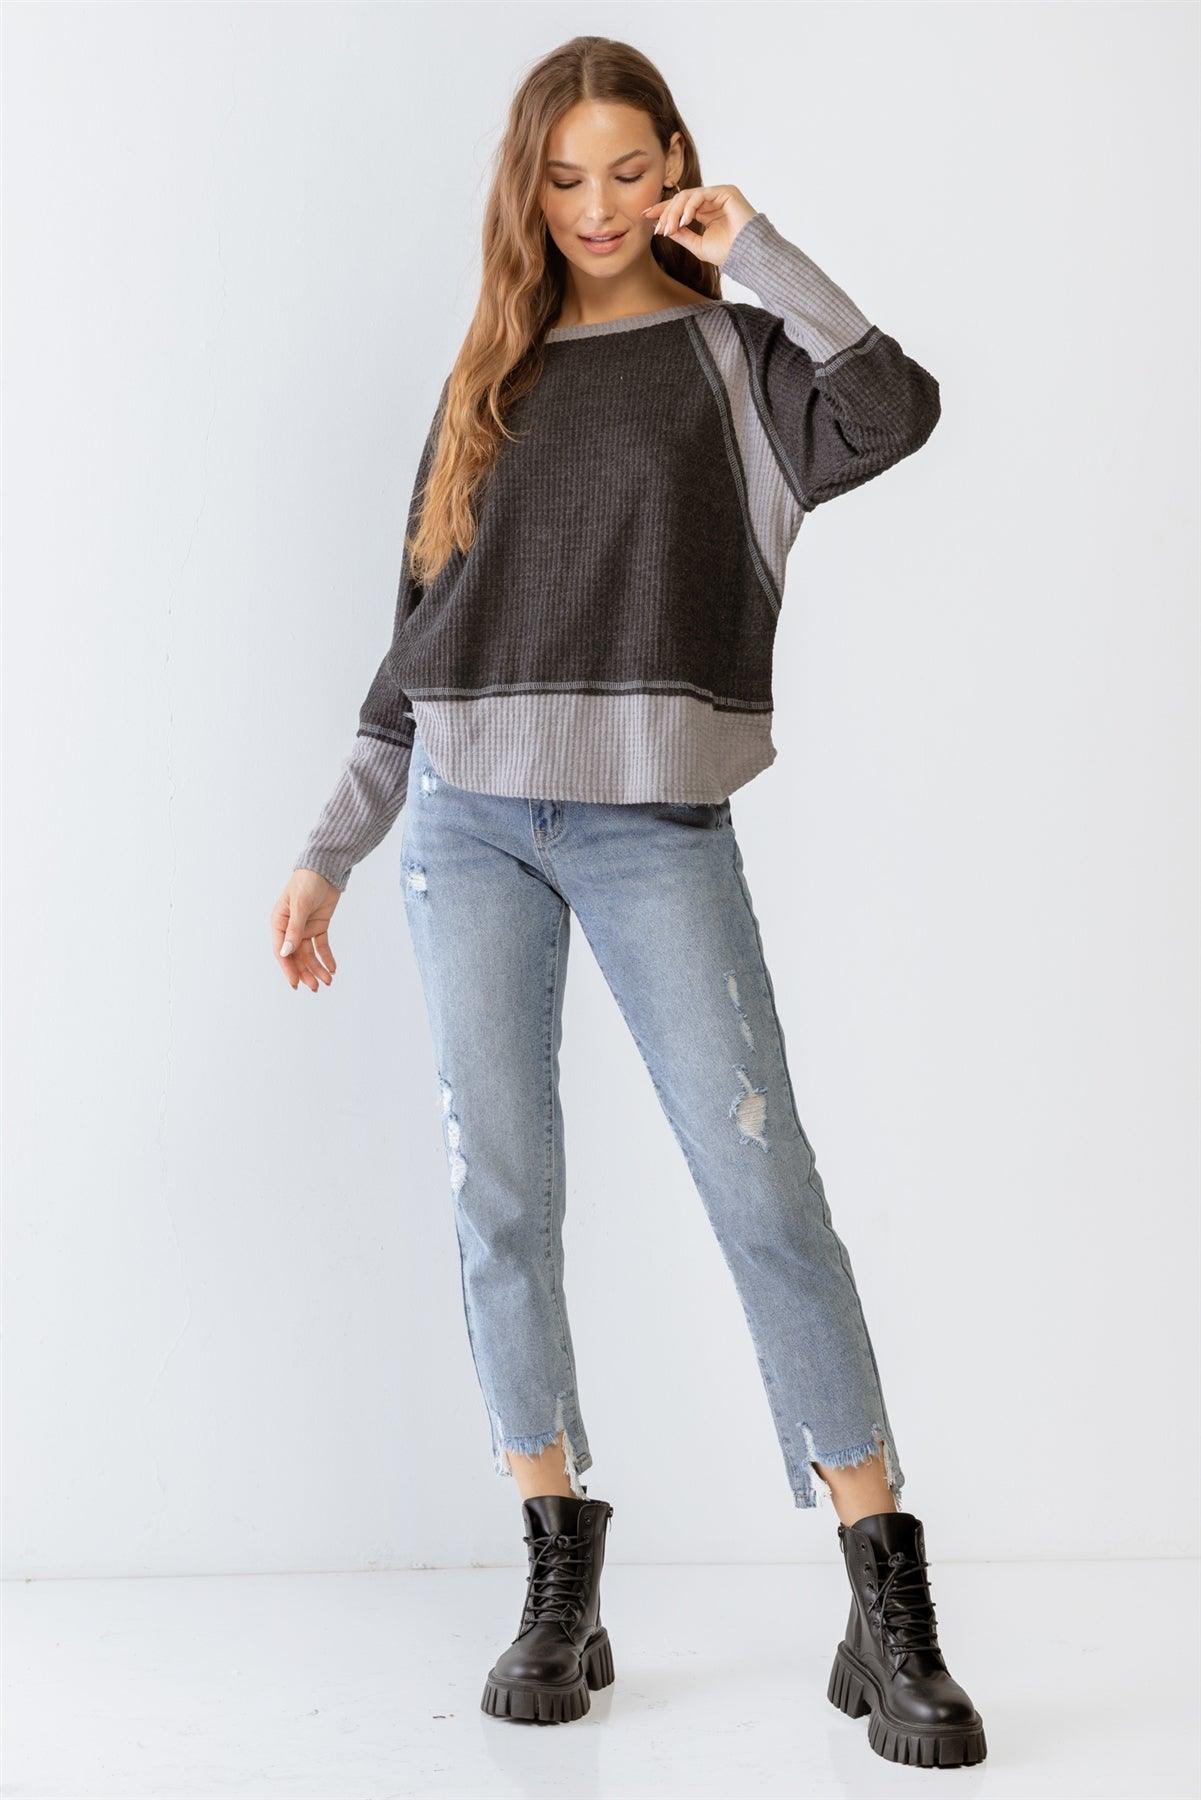 Charcoal & Grey Colorblock Waffle Knit Long Sleeve Top  S-M-L/2-2-2